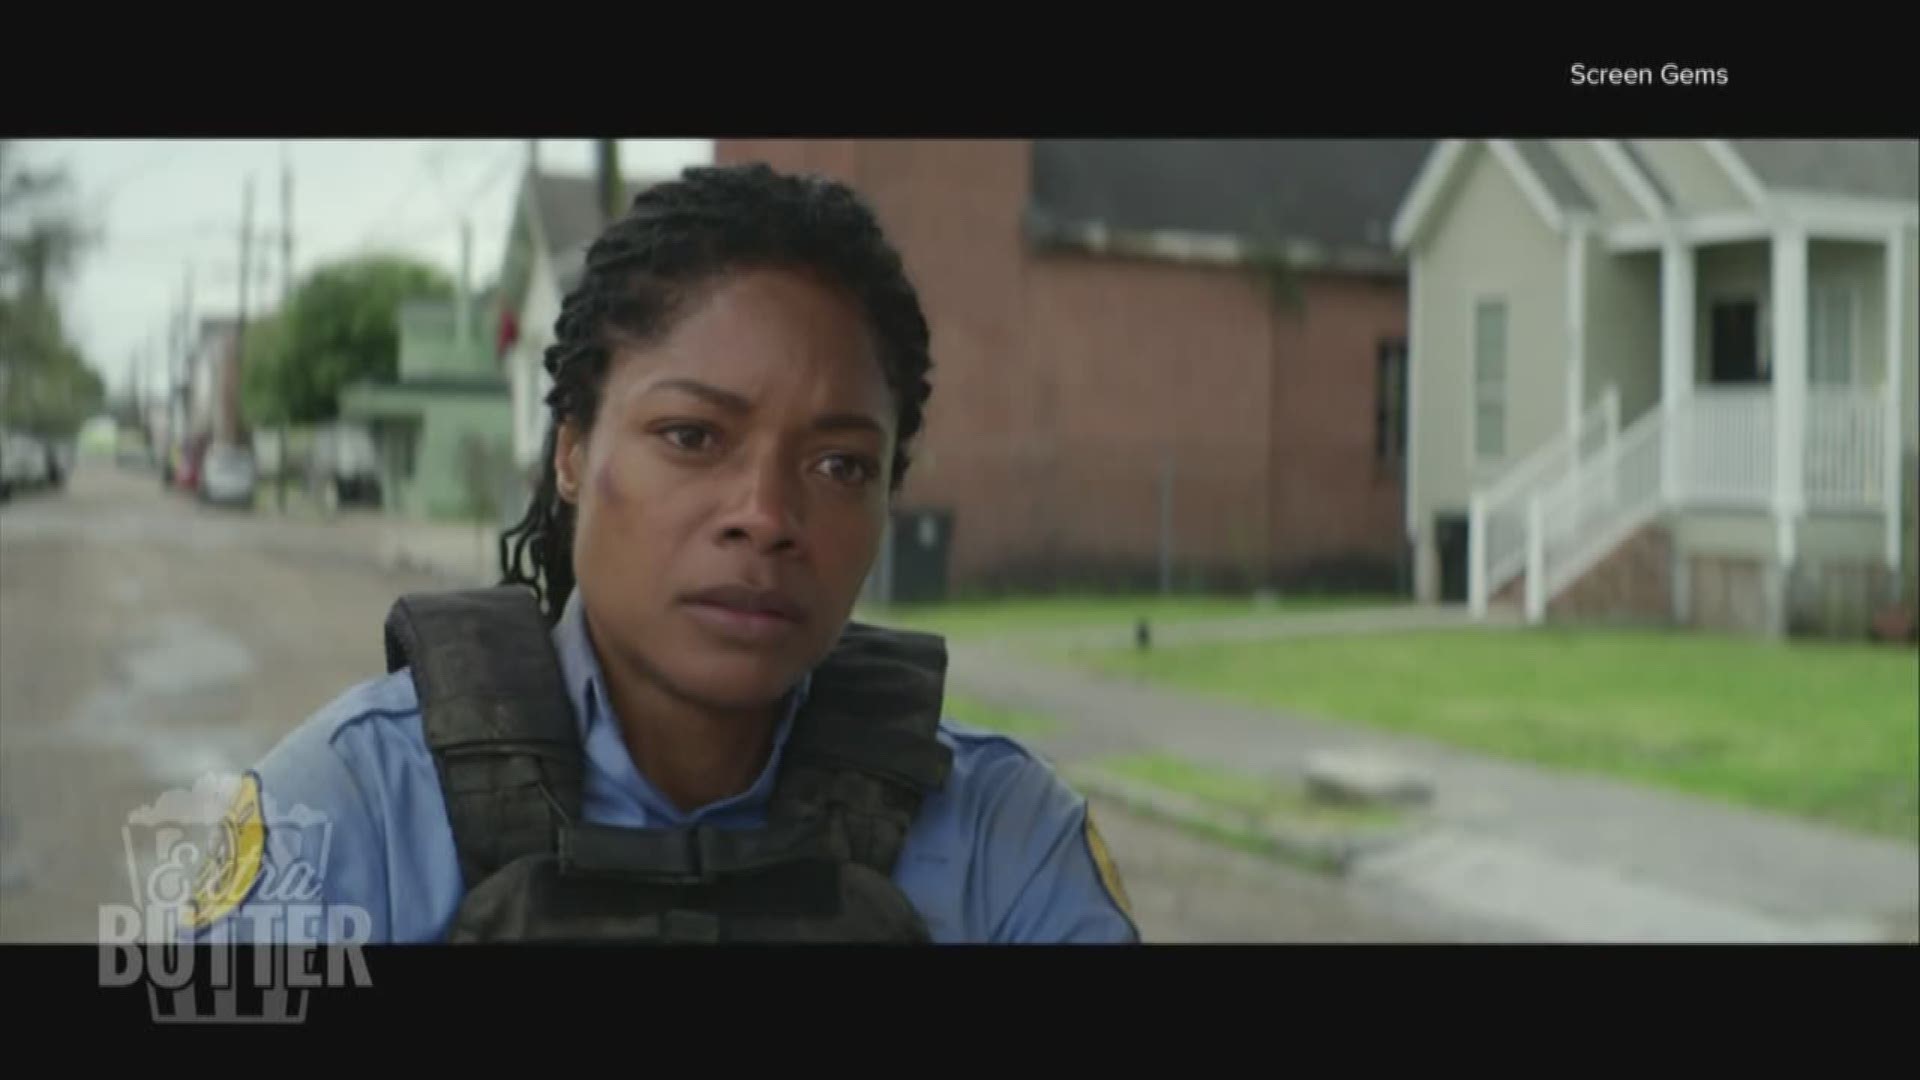 Naomie Harris talks about the message behind the movie 'Black and Blue' and why she came out of acting retirement to do it.